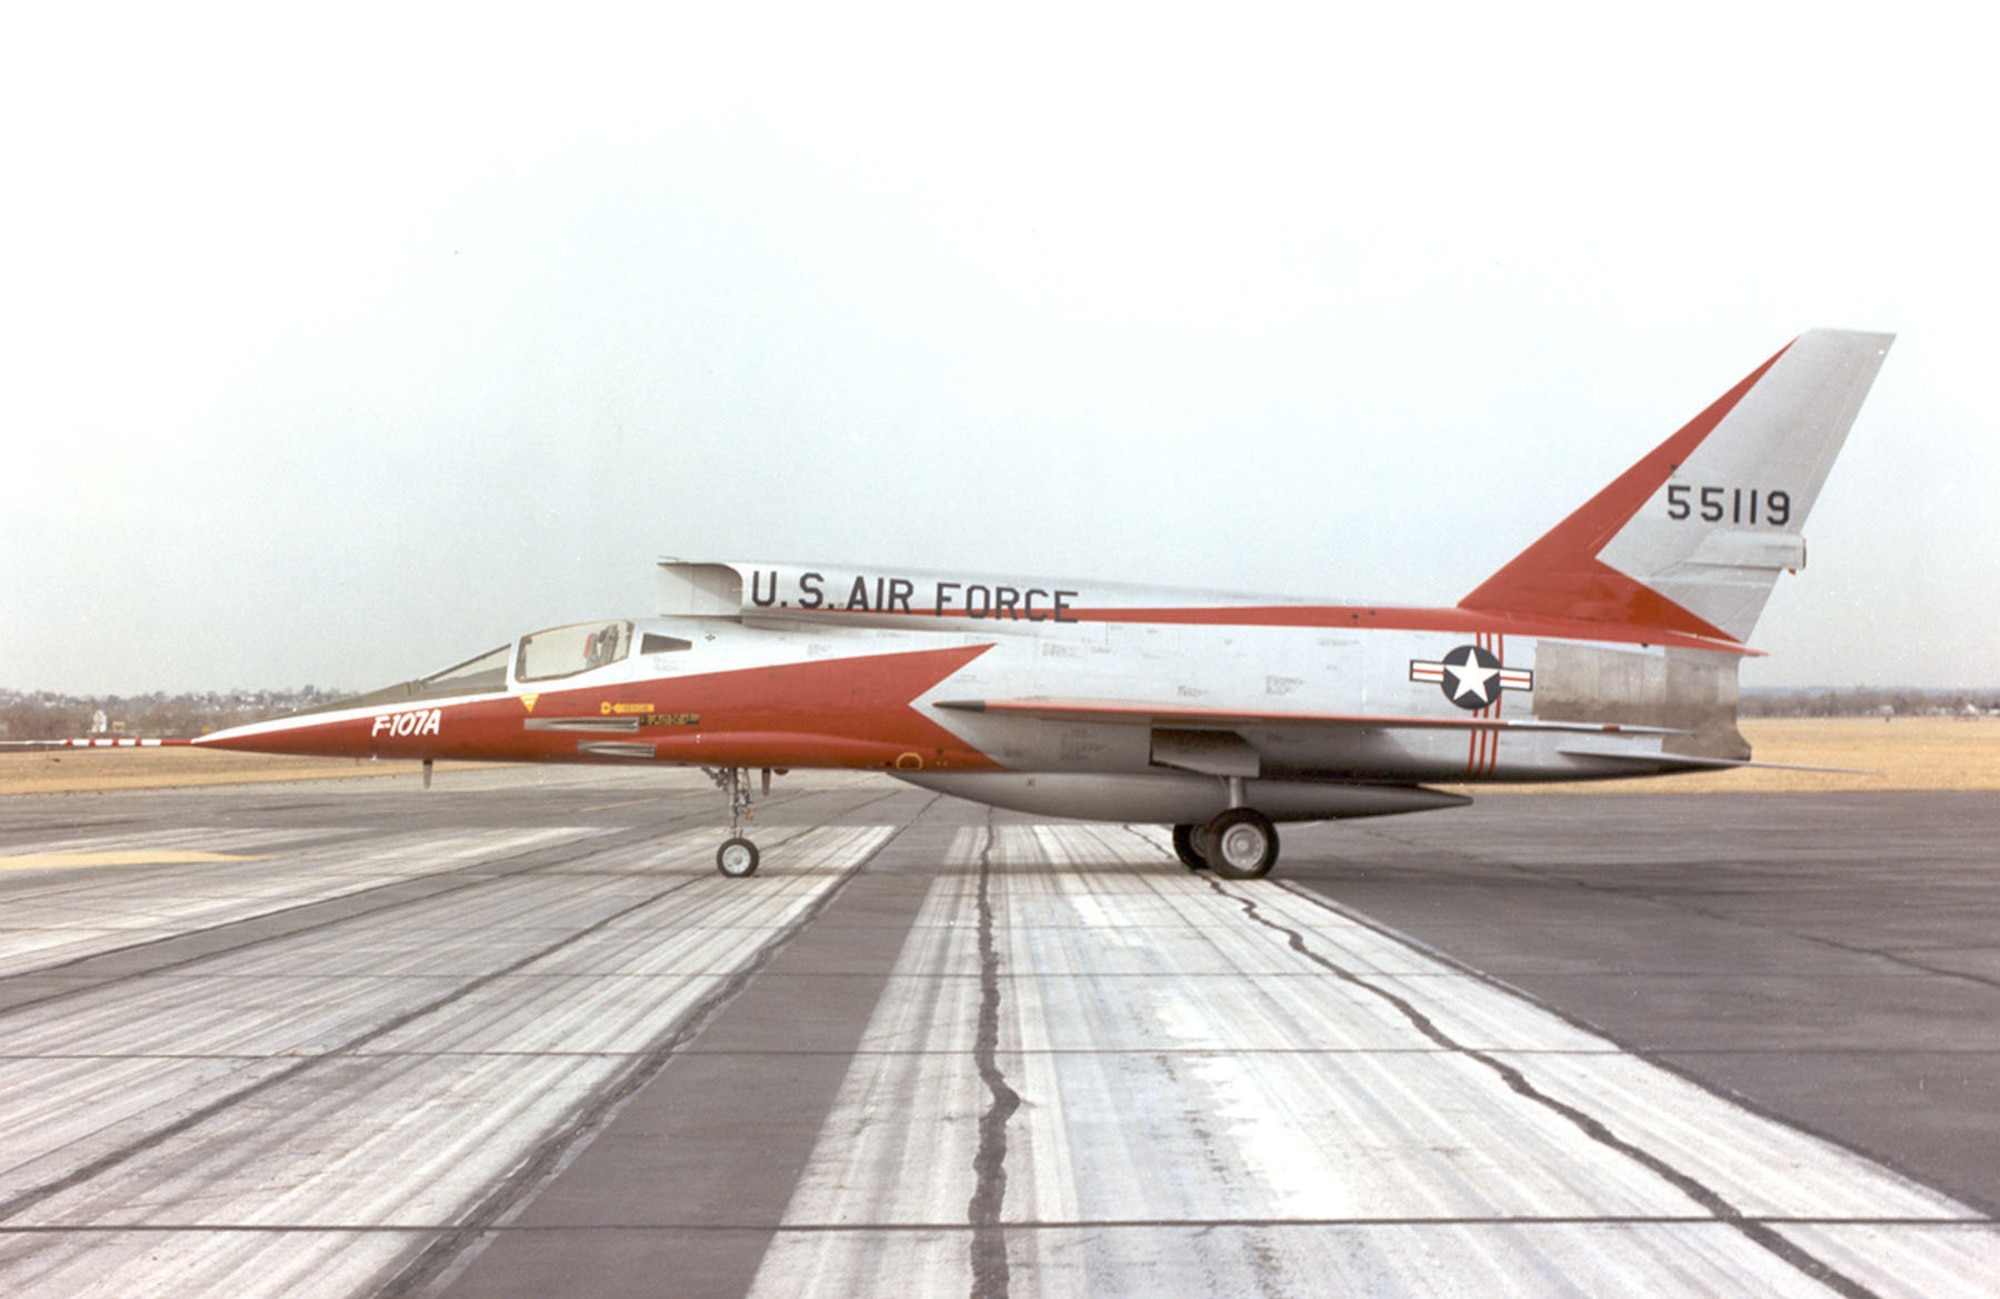 DAYTON, Ohio -- North American F-107A at the National Museum of the United States Air Force. (U.S. Air Force photo)